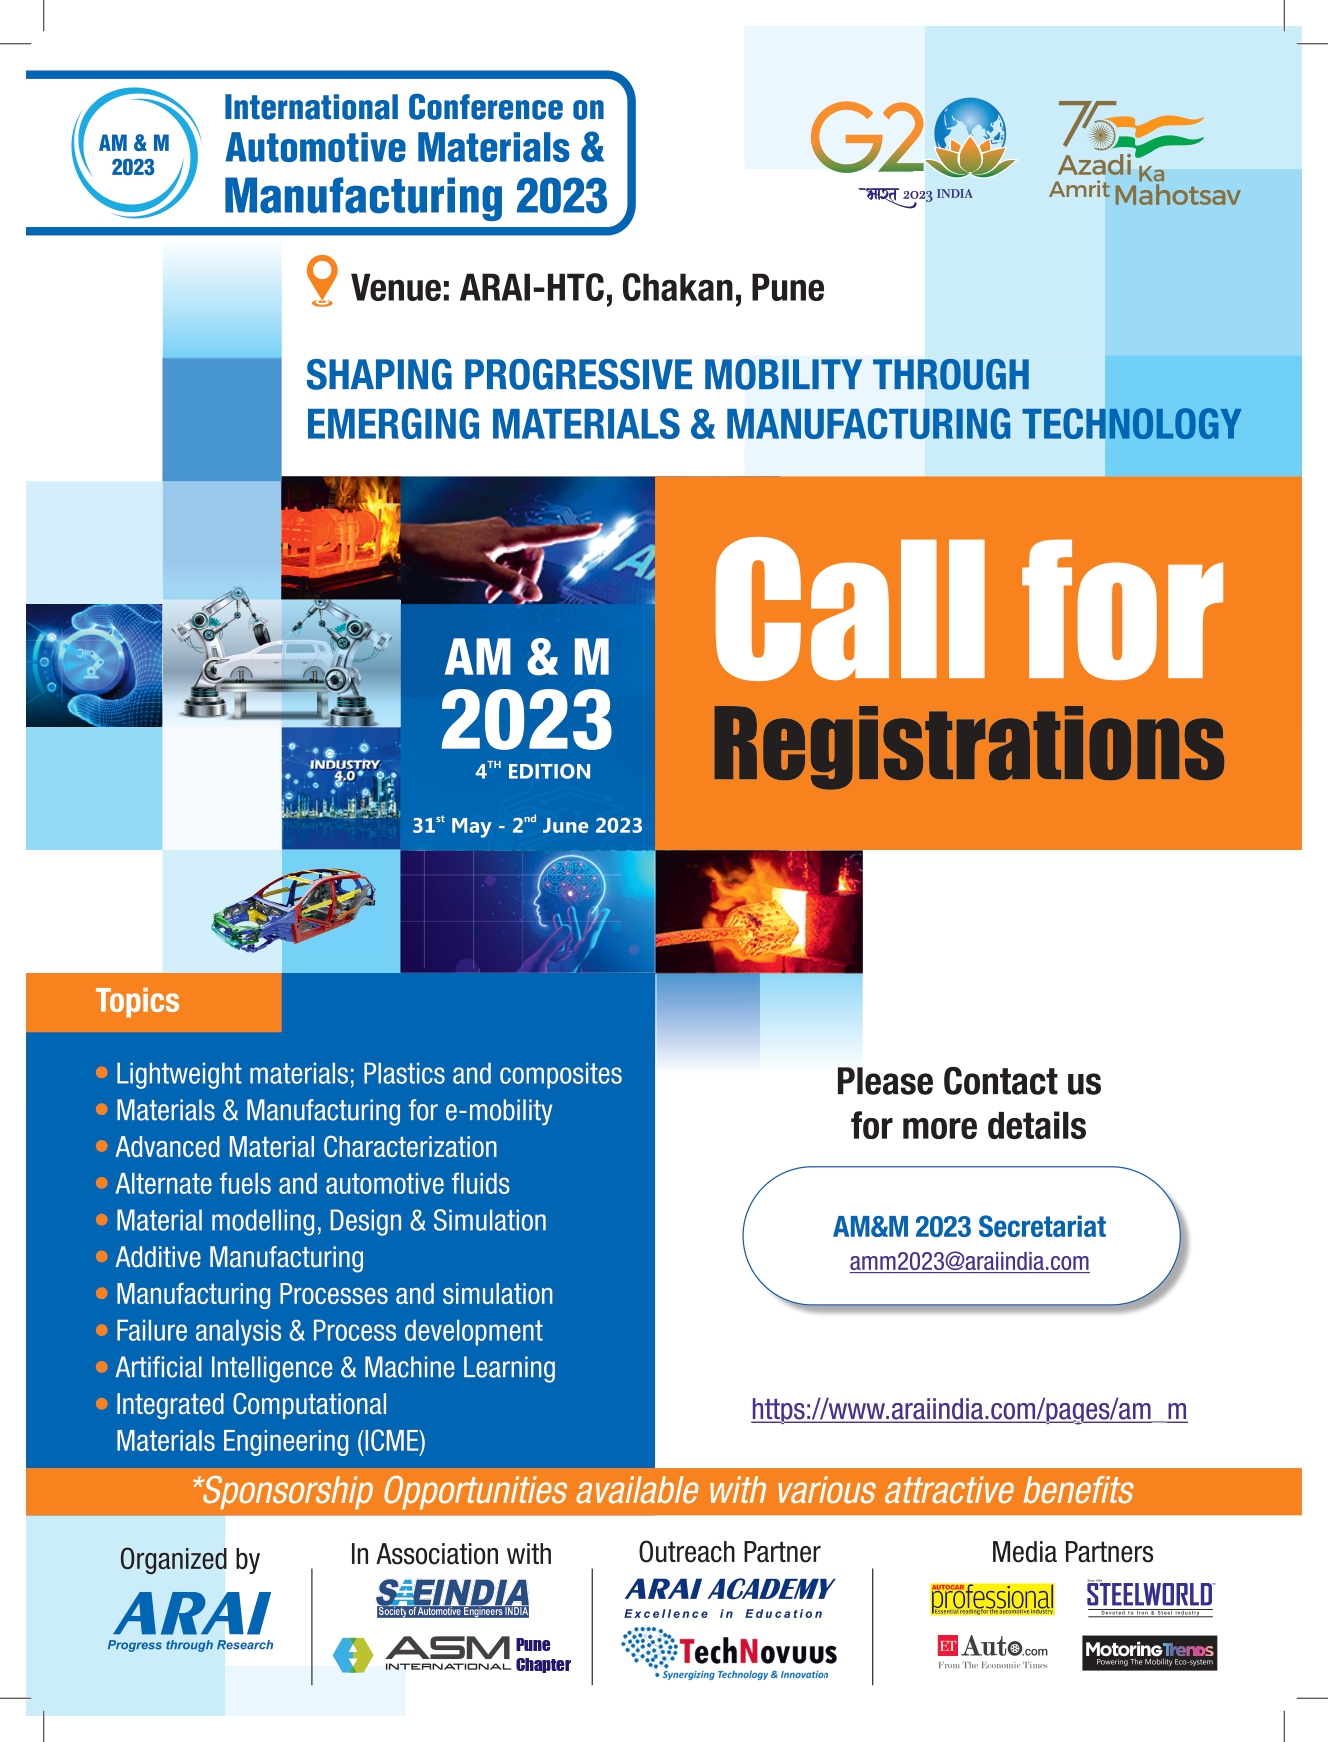 International Conference on Automotive Materials and Manufacturing (AM&M 2023)